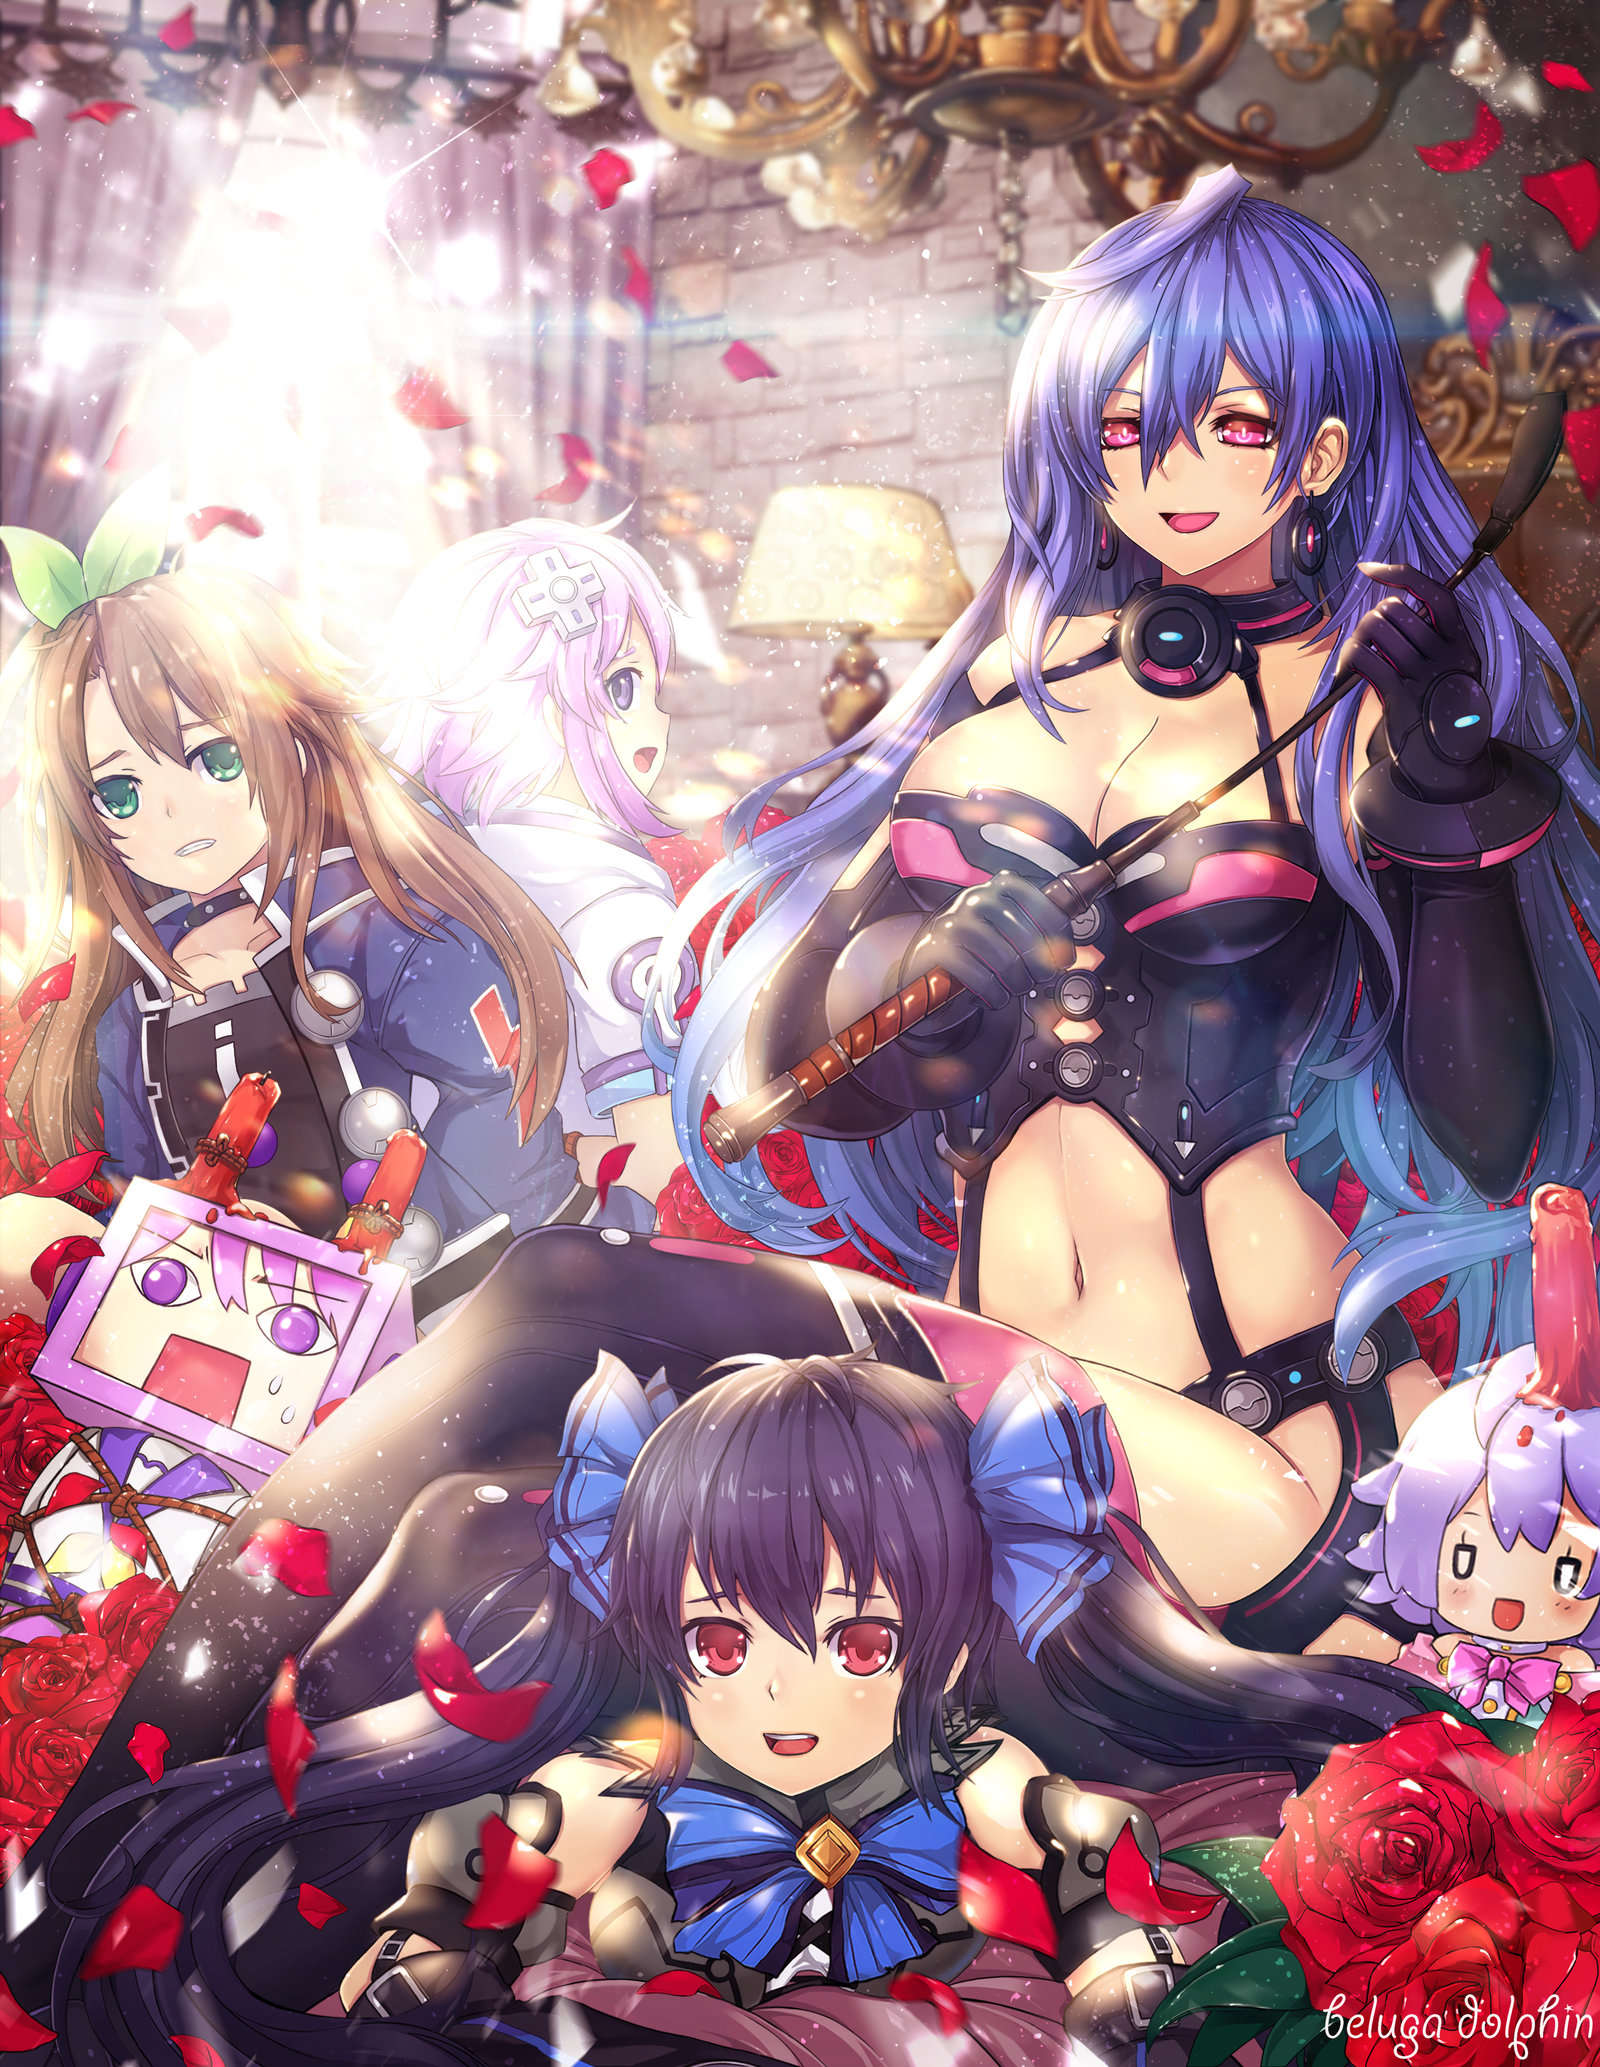 If iris heart nepgyaa neptune and noire kami jigen game neptune v and neptune series drawn by beluga dolphin 92032eadb37874a100d0dc0